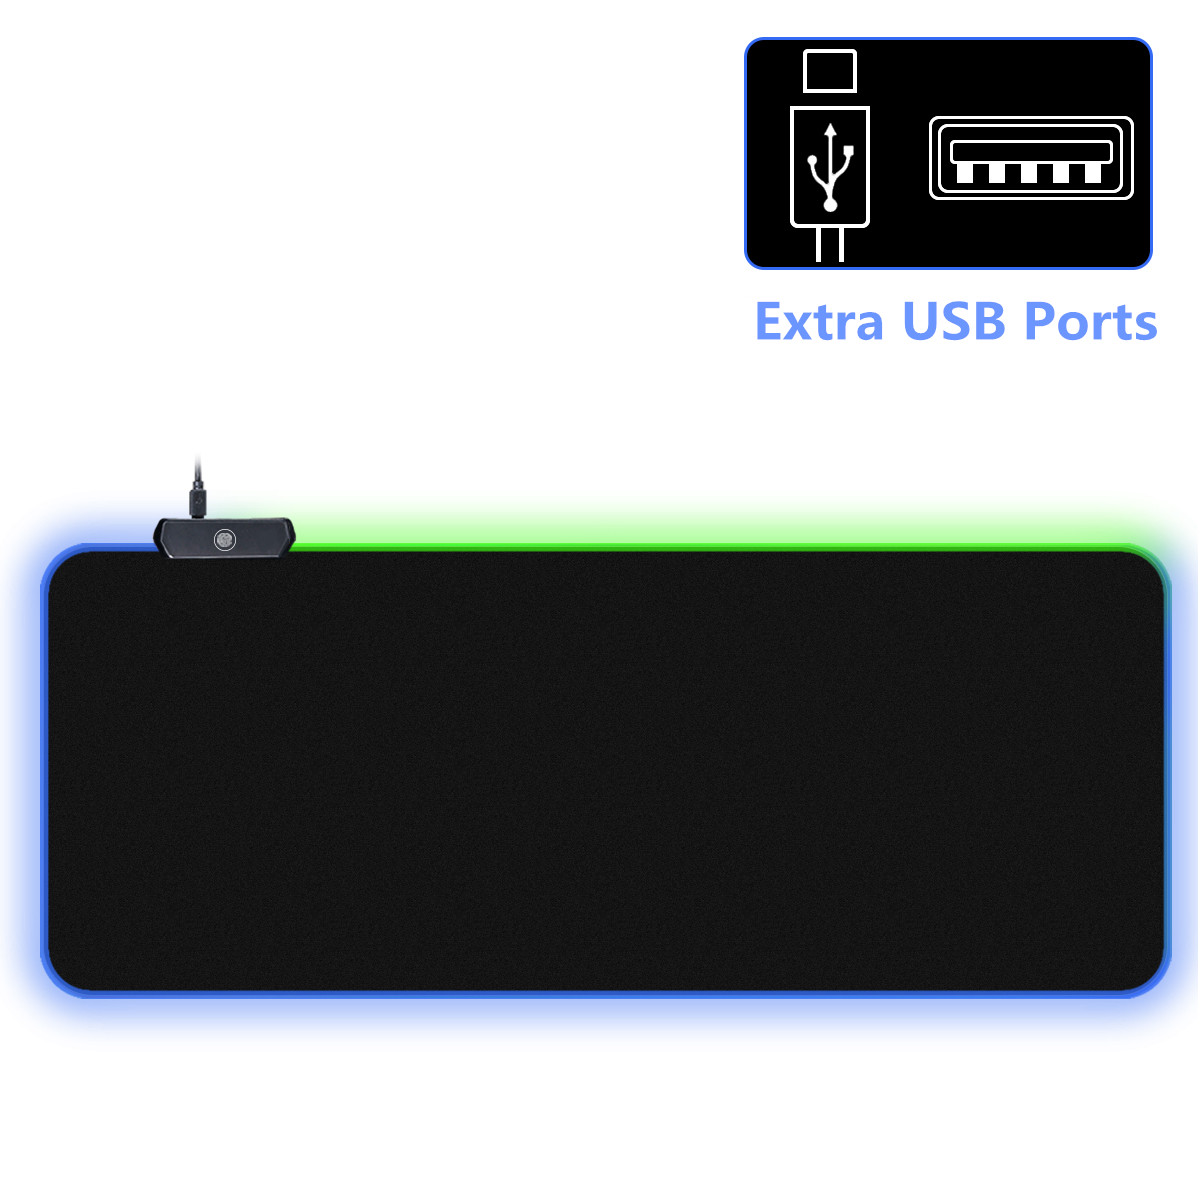 RGB Mouse Pad, RGB Gaming Mouse Pad, Large Mouse Pad, Extended Mouse Pad, 32" x 12" Long Computer Mouse Pad w/ Non-Slip Rubber Base, Smooth Surface Waterproof Keyboard Mouse Pad w/ USB Port - image 1 of 8